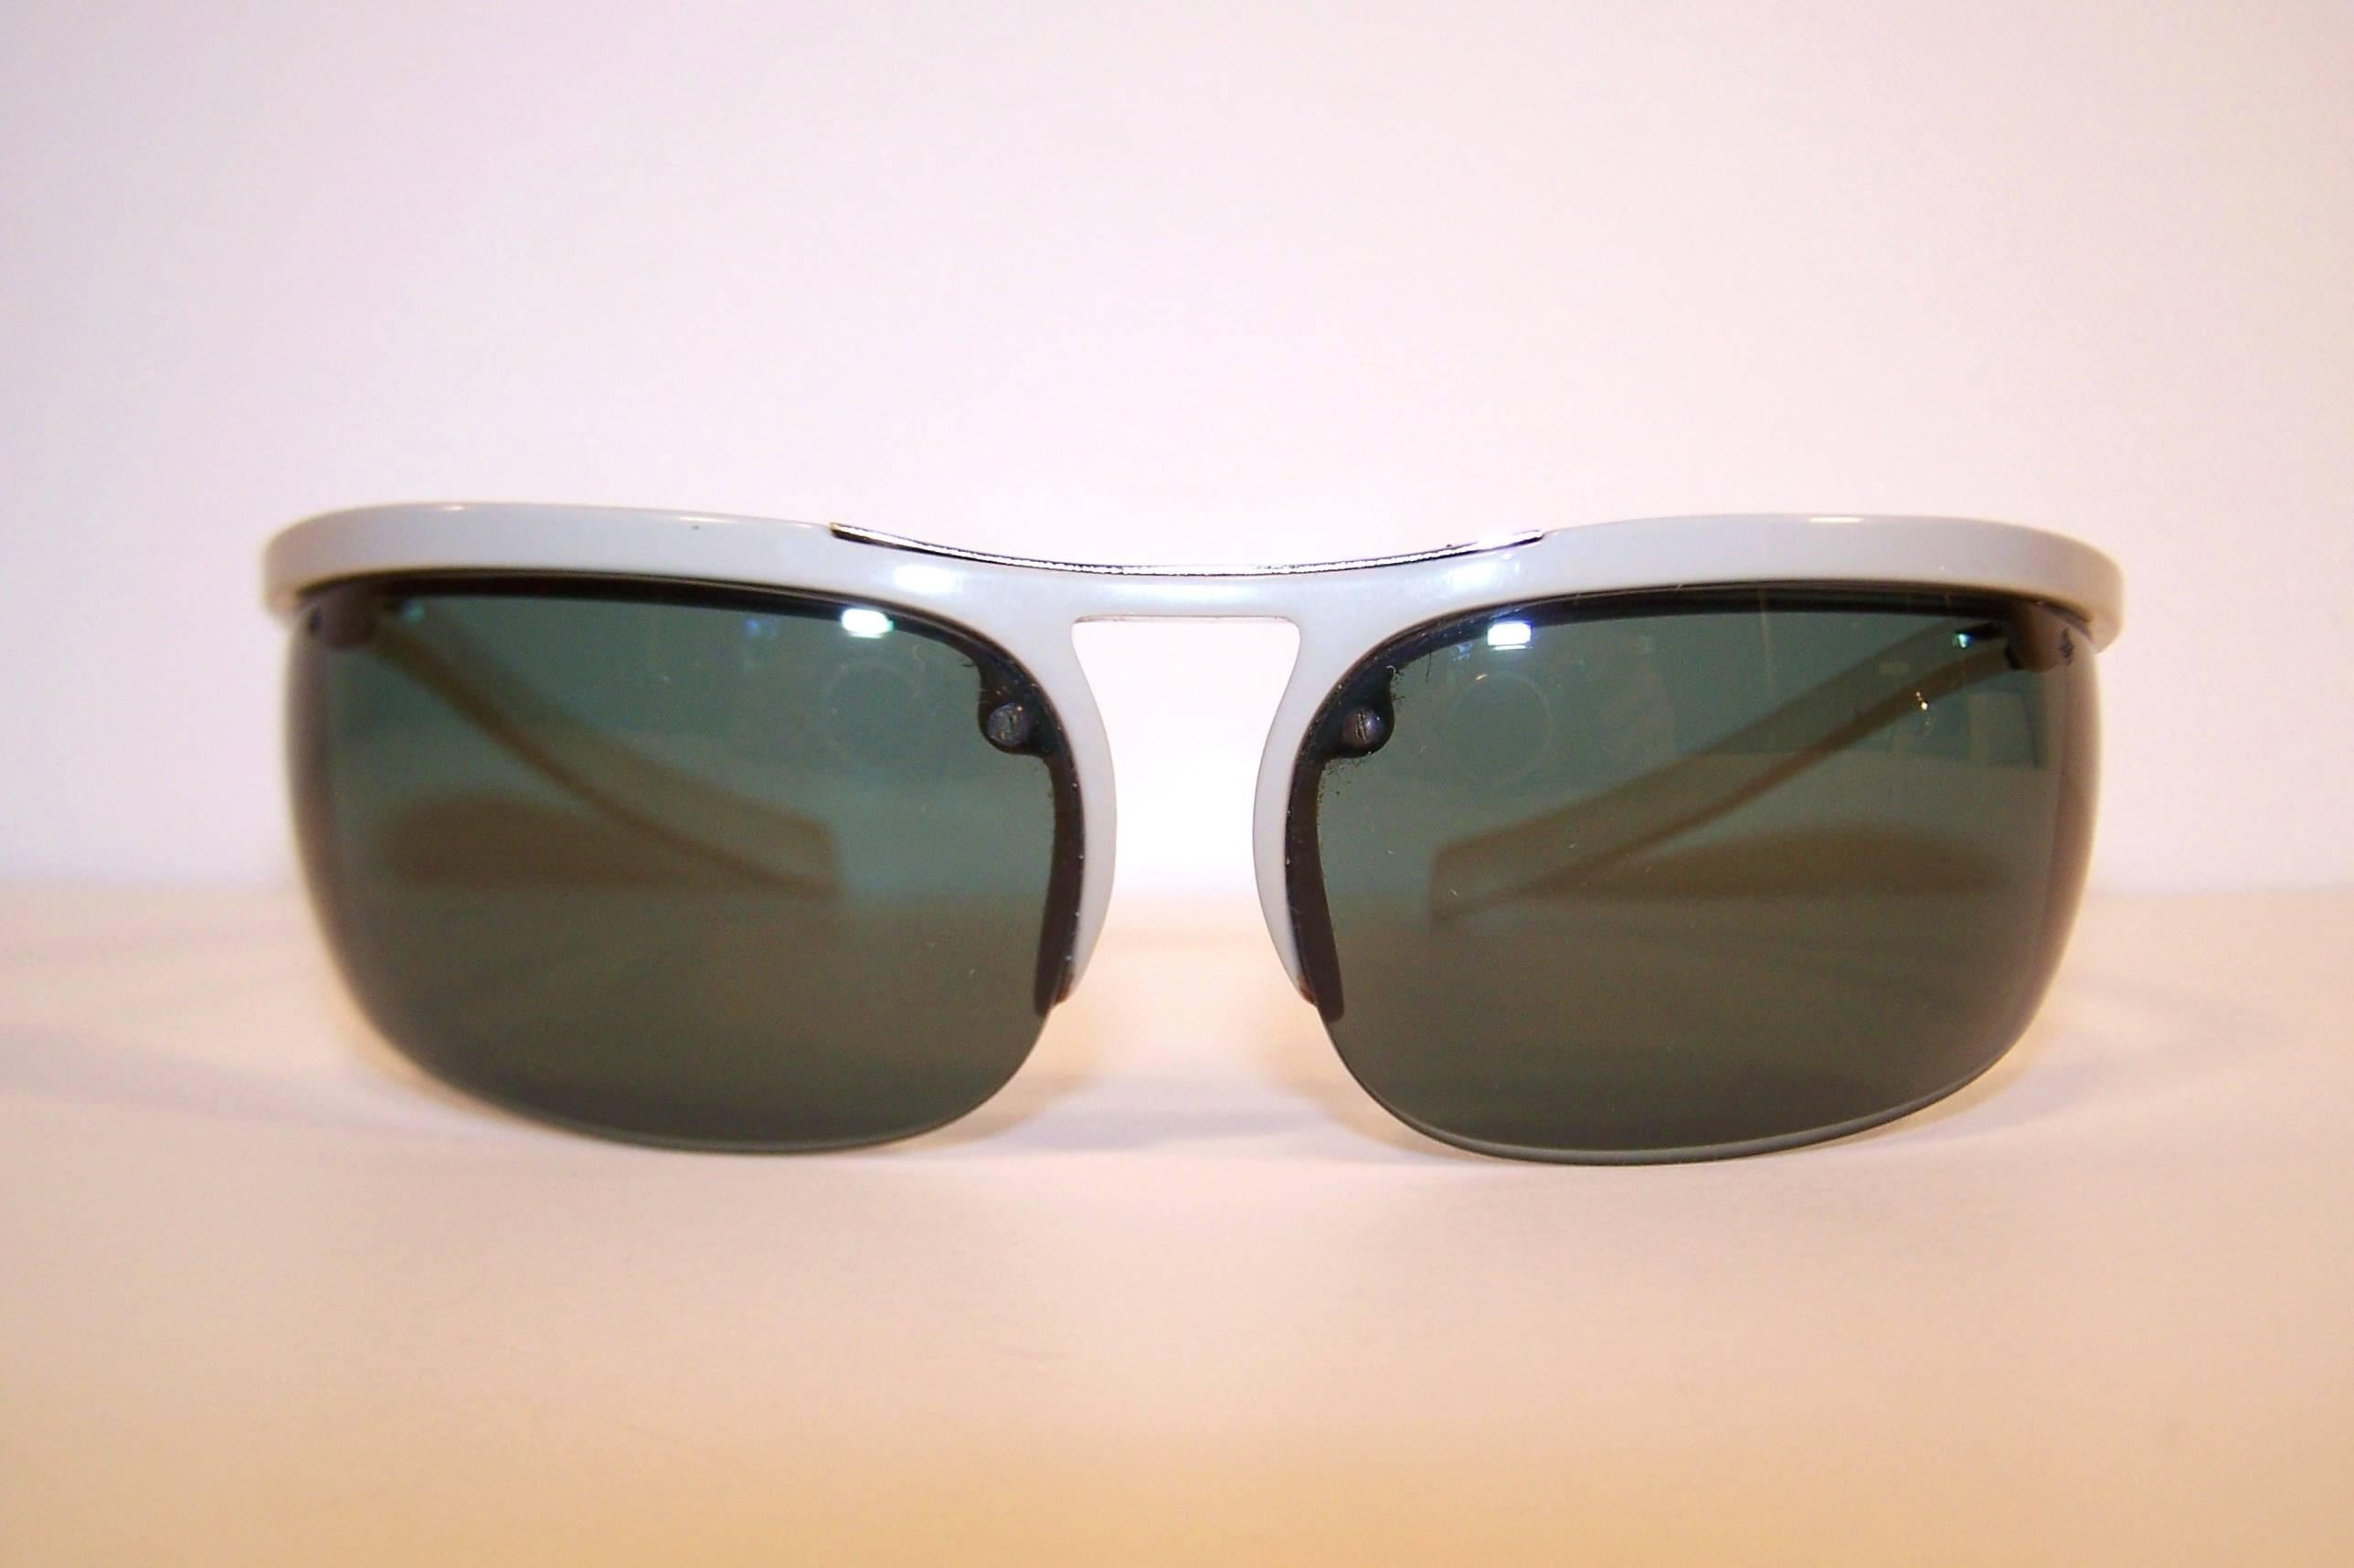 renauld mustang sunglasses for sale